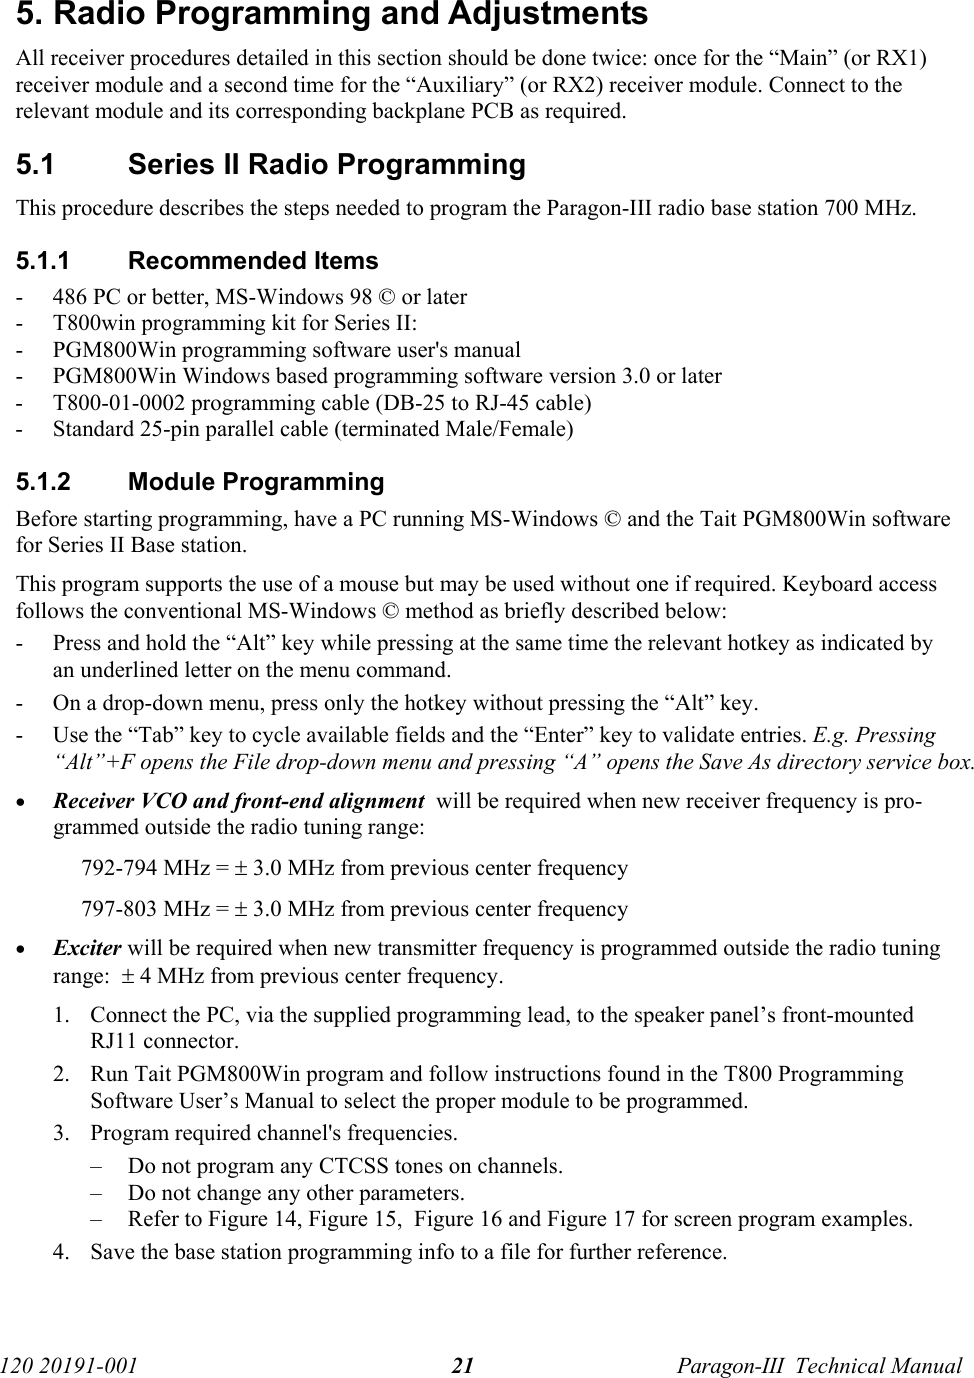   120 20191-001  Paragon-III  Technical Manual 21 5. Radio Programming and Adjustments All receiver procedures detailed in this section should be done twice: once for the “Main” (or RX1) receiver module and a second time for the “Auxiliary” (or RX2) receiver module. Connect to the relevant module and its corresponding backplane PCB as required.5.1  Series II Radio Programming This procedure describes the steps needed to program the Paragon-III radio base station 700 MHz. 5.1.1 Recommended Items - 486 PC or better, MS-Windows 98 © or later - T800win programming kit for Series II: - PGM800Win programming software user&apos;s manual - PGM800Win Windows based programming software version 3.0 or later - T800-01-0002 programming cable (DB-25 to RJ-45 cable) - Standard 25-pin parallel cable (terminated Male/Female) 5.1.2 Module Programming Before starting programming, have a PC running MS-Windows © and the Tait PGM800Win software for Series II Base station.  This program supports the use of a mouse but may be used without one if required. Keyboard access follows the conventional MS-Windows © method as briefly described below: - Press and hold the “Alt” key while pressing at the same time the relevant hotkey as indicated by an underlined letter on the menu command. - On a drop-down menu, press only the hotkey without pressing the “Alt” key.  - Use the “Tab” key to cycle available fields and the “Enter” key to validate entries. E.g. Pressing “Alt”+F opens the File drop-down menu and pressing “A” opens the Save As directory service box.  • Receiver VCO and front-end alignment  will be required when new receiver frequency is pro-grammed outside the radio tuning range: 792-794 MHz = ± 3.0 MHz from previous center frequency 797-803 MHz = ± 3.0 MHz from previous center frequency • Exciter will be required when new transmitter frequency is programmed outside the radio tuning range:  ± 4 MHz from previous center frequency. 1. Connect the PC, via the supplied programming lead, to the speaker panel’s front-mounted RJ11 connector. 2. Run Tait PGM800Win program and follow instructions found in the T800 Programming Software User’s Manual to select the proper module to be programmed. 3. Program required channel&apos;s frequencies. – Do not program any CTCSS tones on channels. – Do not change any other parameters. – Refer to Figure 14, Figure 15,  Figure 16 and Figure 17 for screen program examples. 4. Save the base station programming info to a file for further reference.  